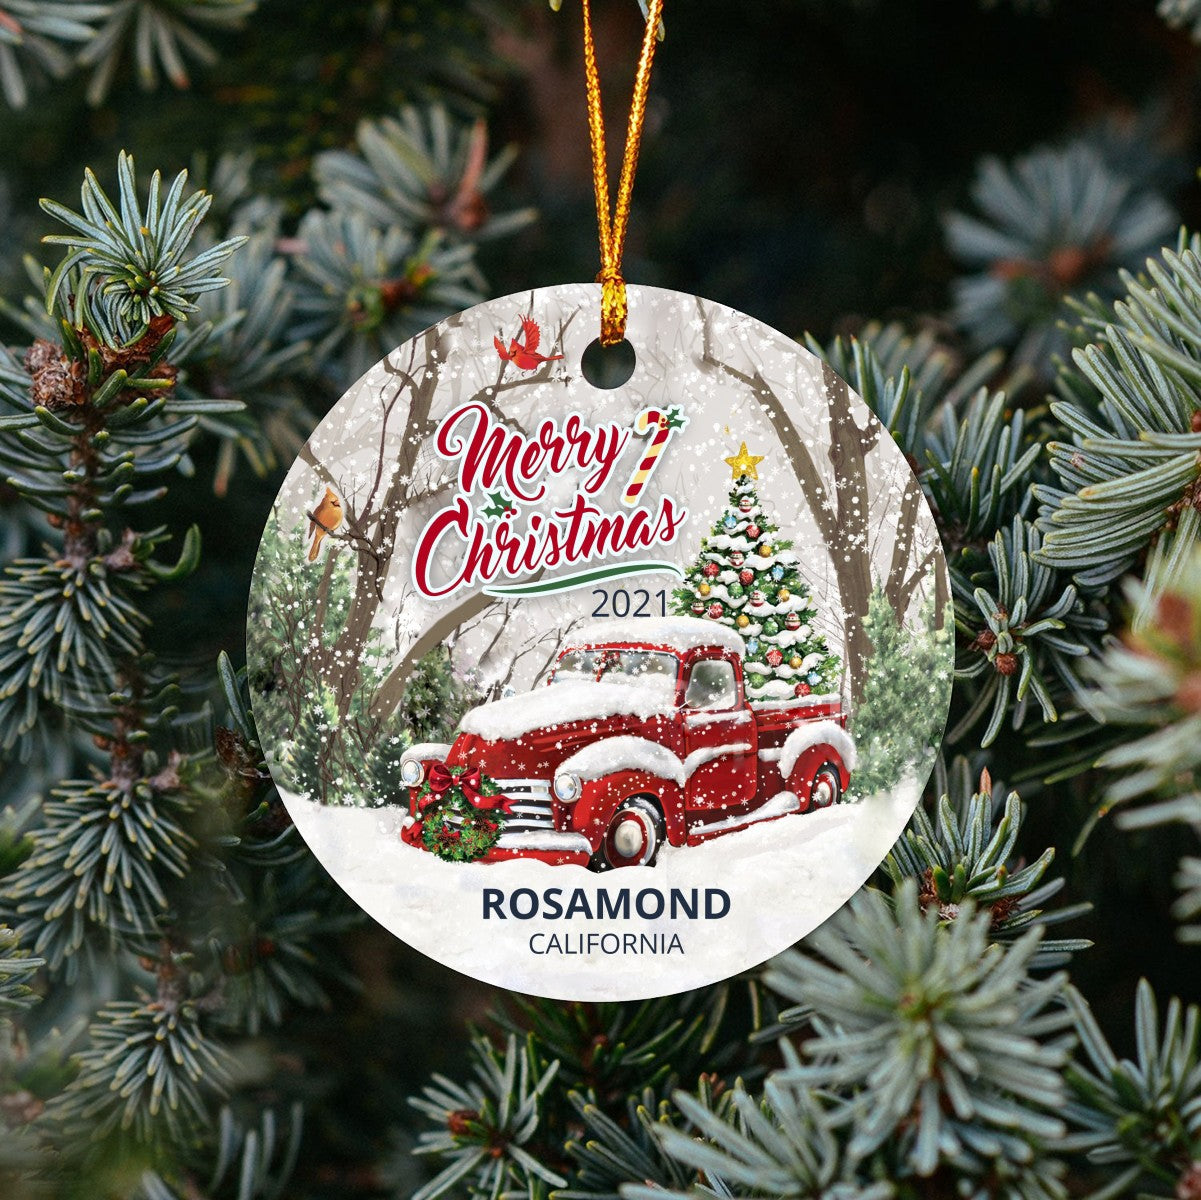 Christmas Tree Ornaments Rosamond - Ornament With Name City, State Rosamond California CA Ornament - Red Truck Xmas Ornaments 3'' Plastic Gift For Family, Friend And Housewarming